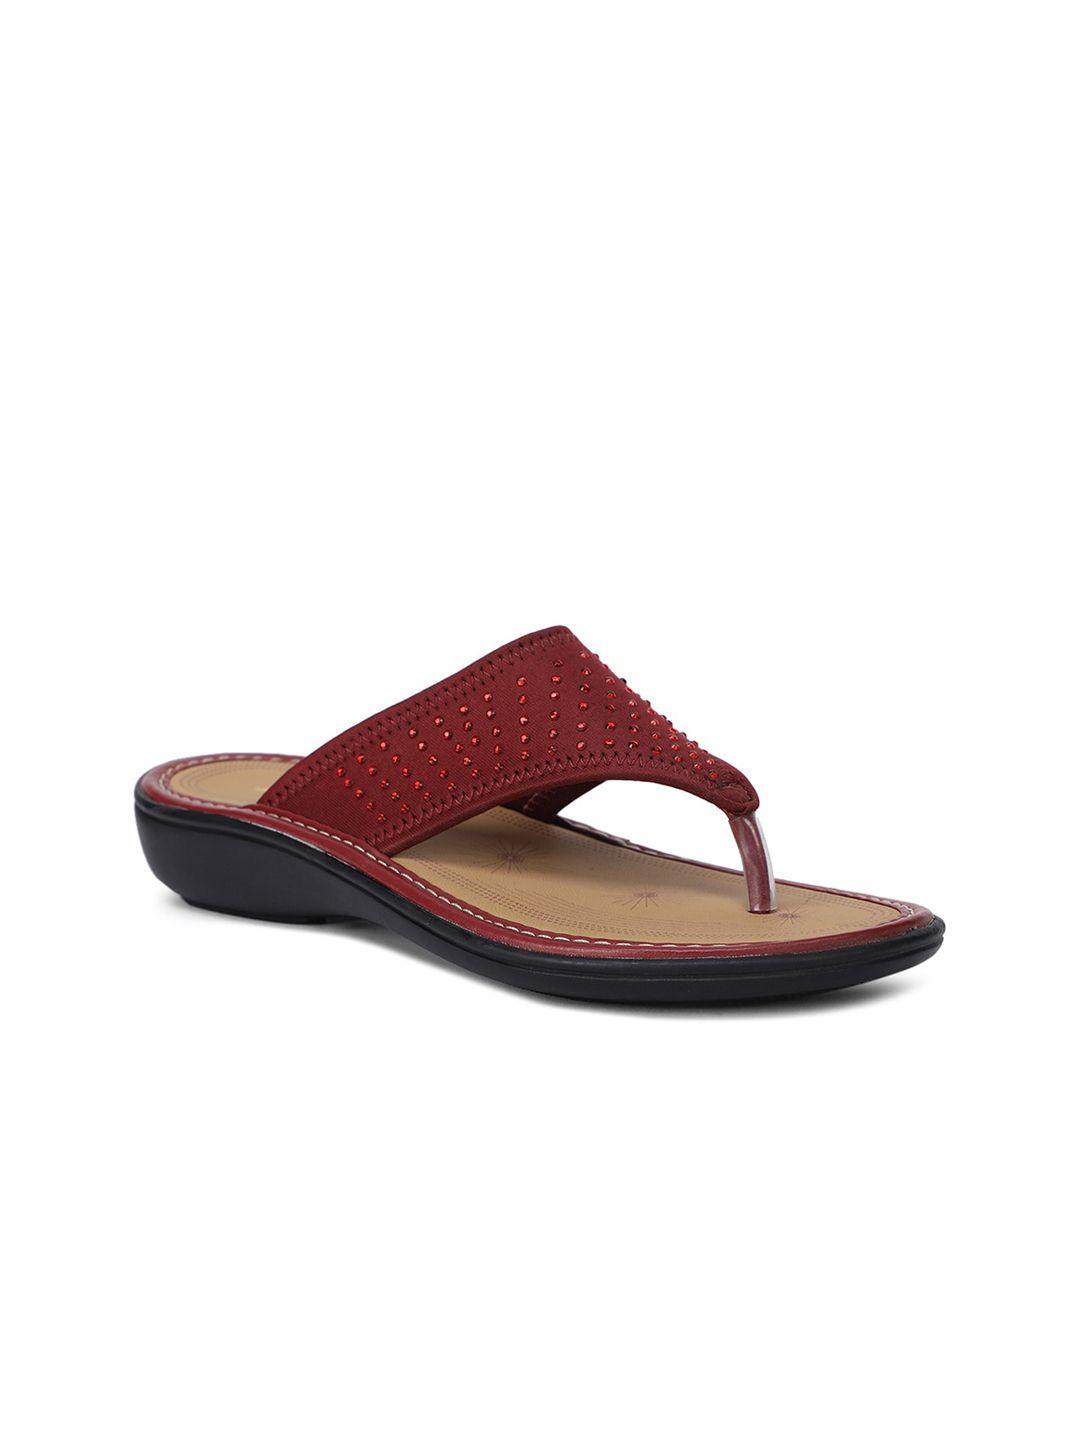 bata-women-red-t-strap-flats-with-laser-cuts